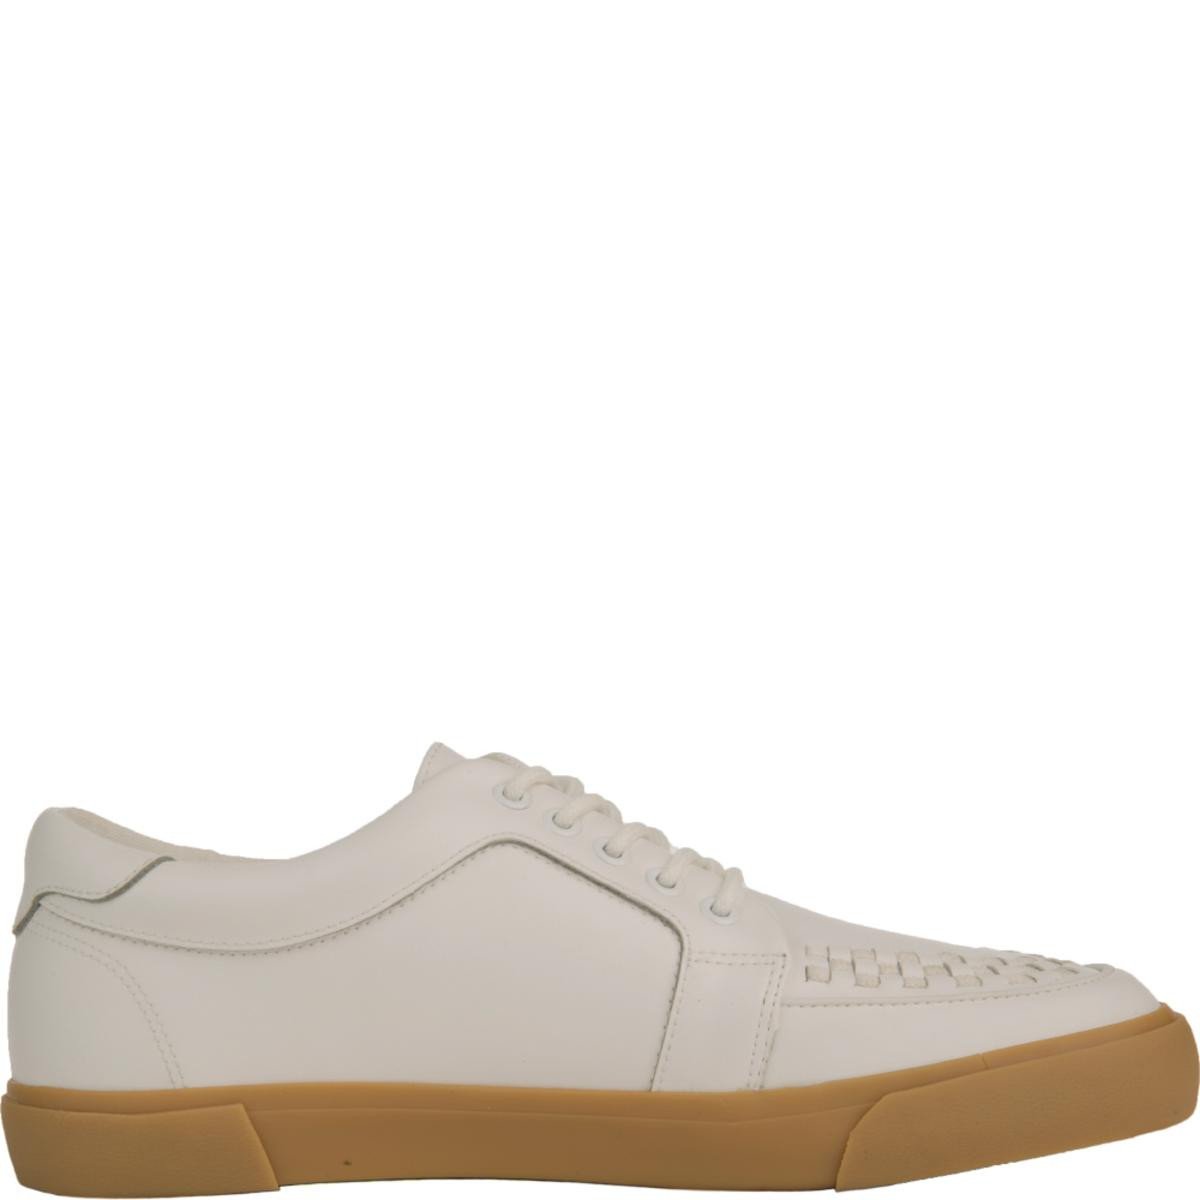 T.U.K for Men: White Leather No-Ring VLK Sneakers